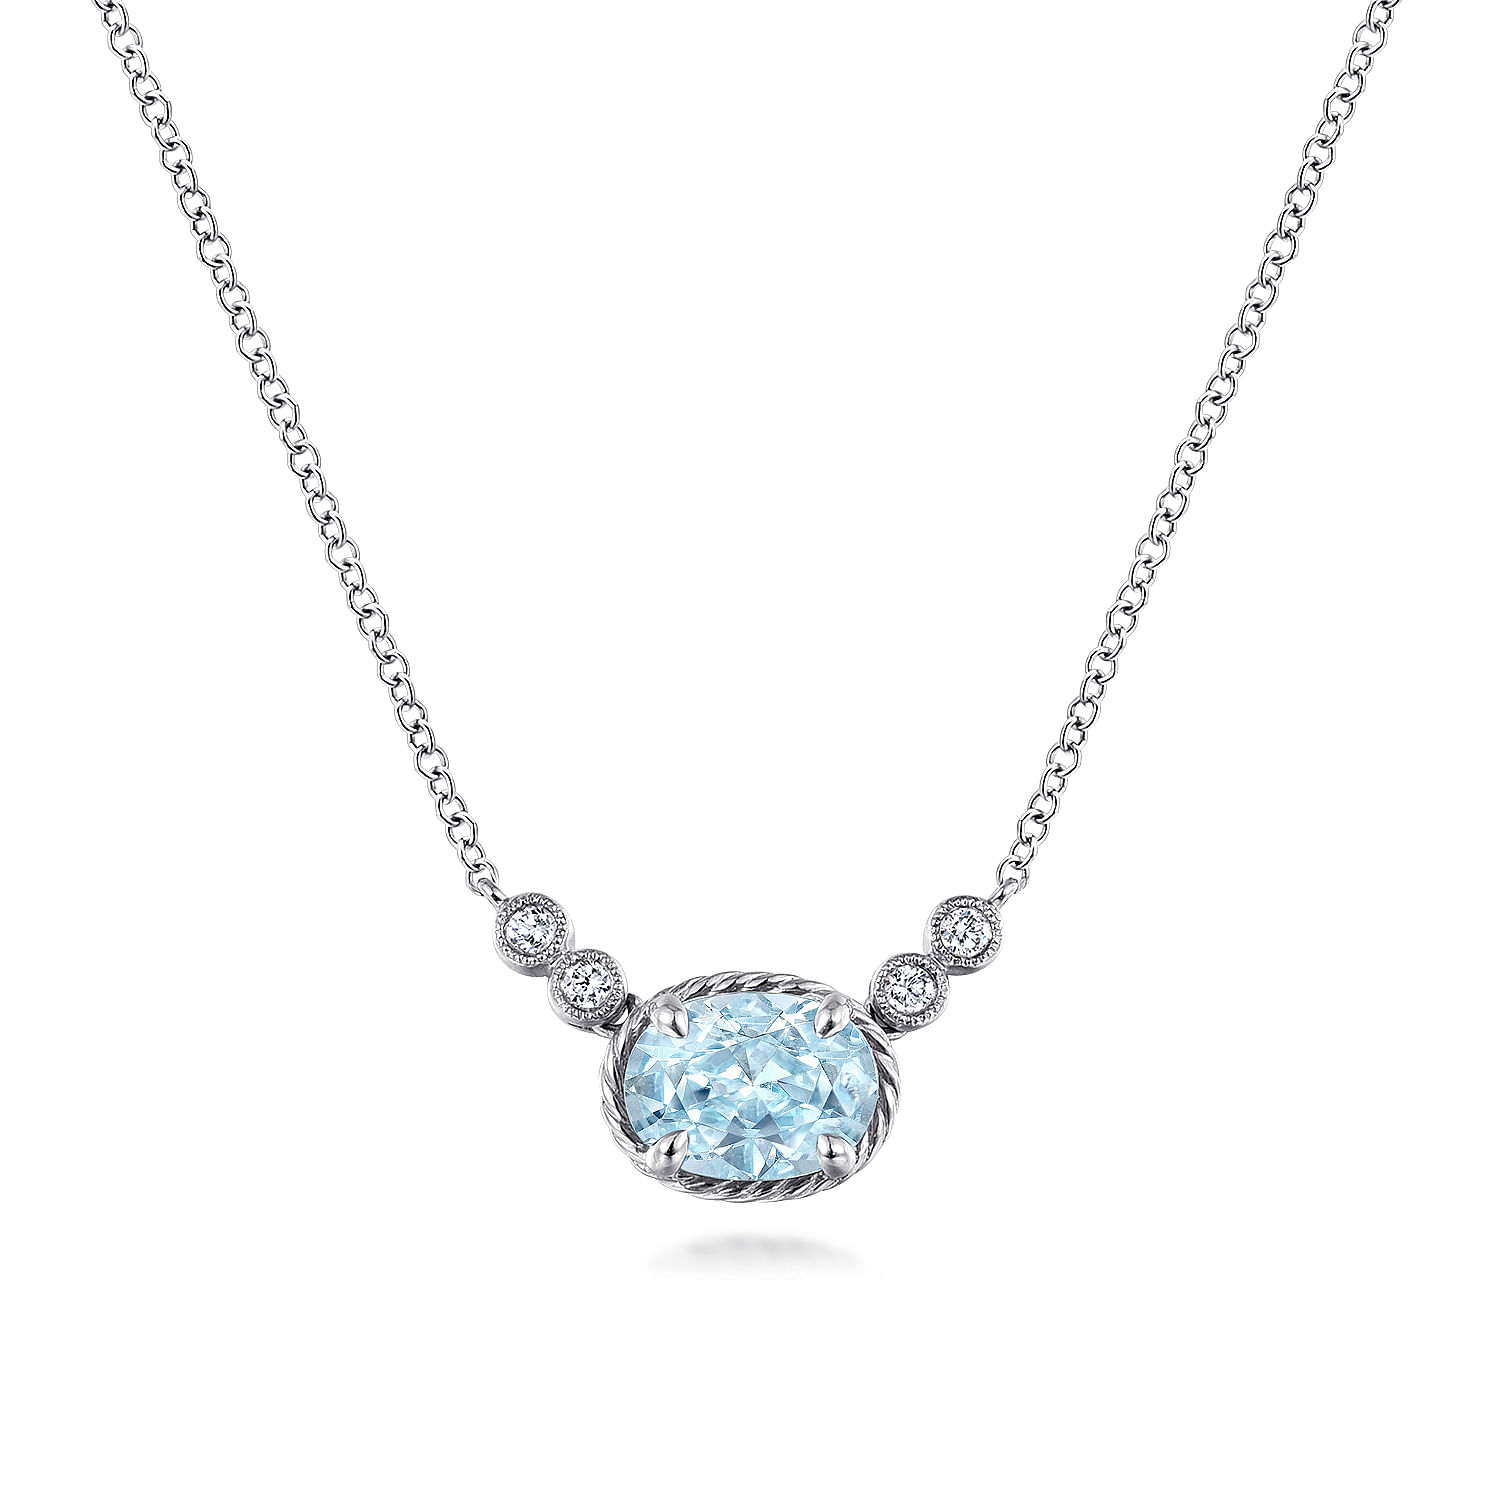 Gabriel - 14K White Gold Oval Aquamarine Pendant Necklace with Diamond Accents